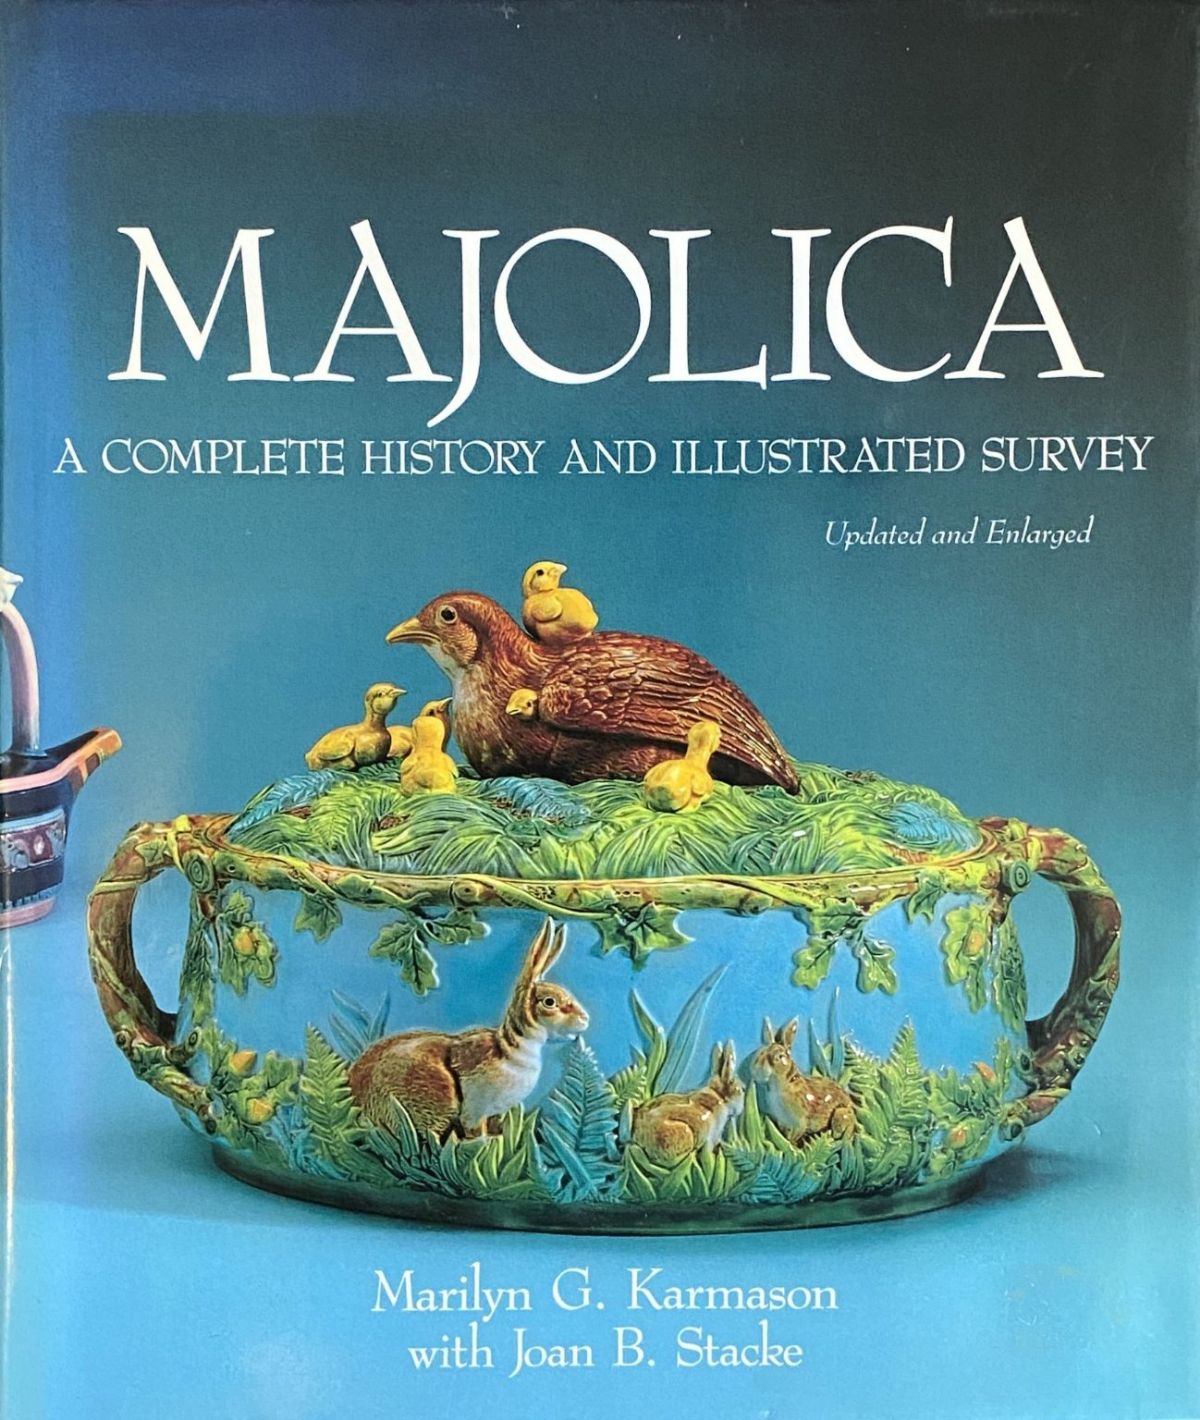 MAJOLICA: A Complete History And Illustrated Survey